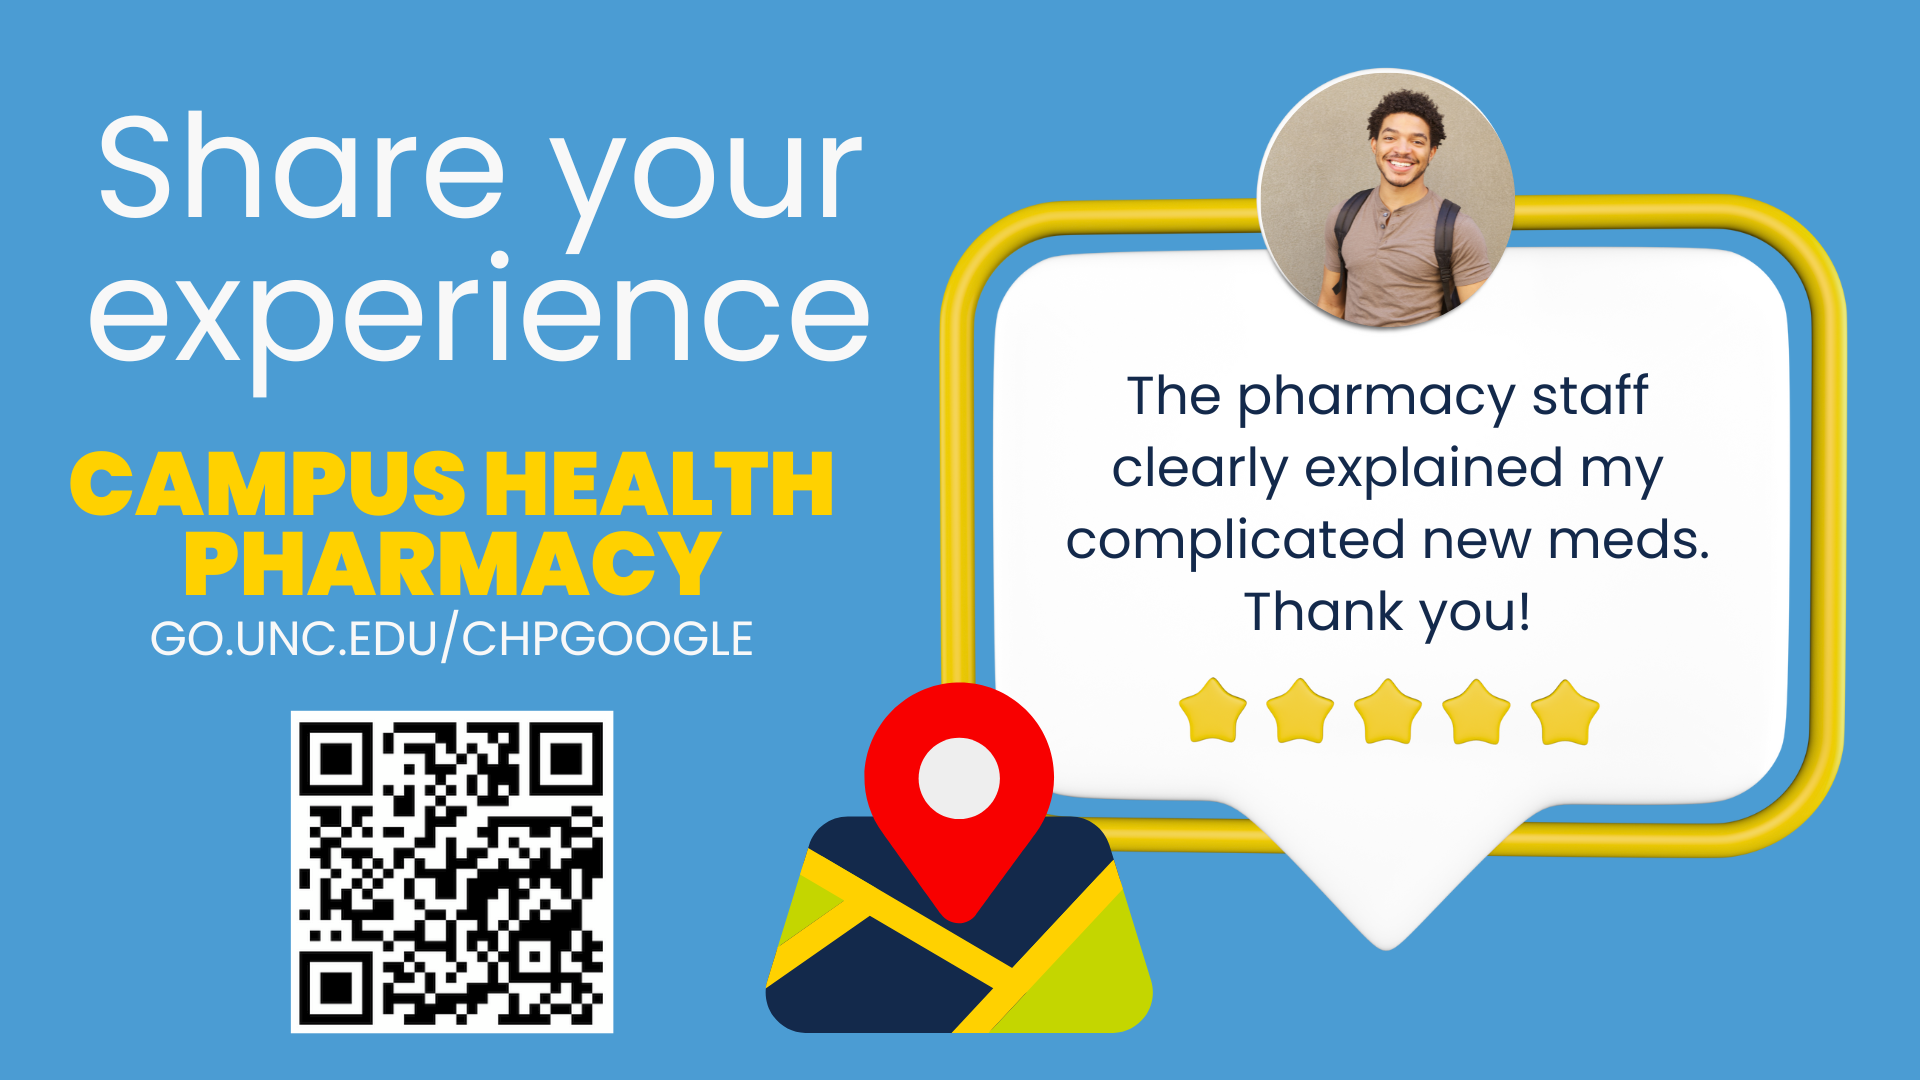 Share your experience with Campus Health Pharmacy